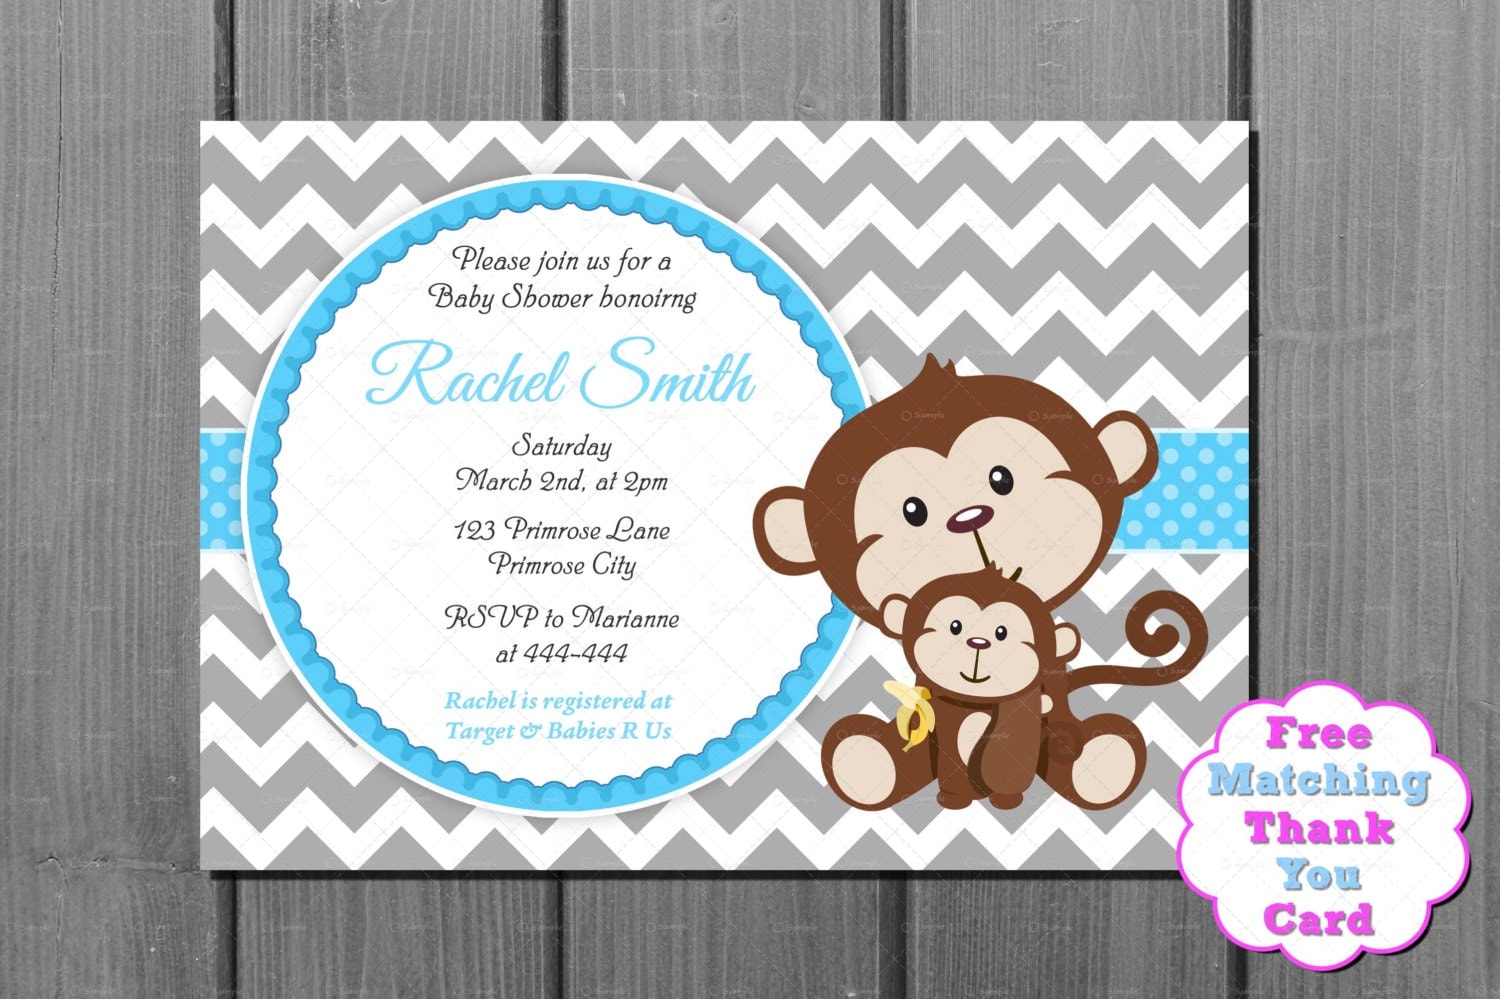 Baby Shower Card To Print Free : 39 best images about Baby shower cards on Pinterest ... / If ...